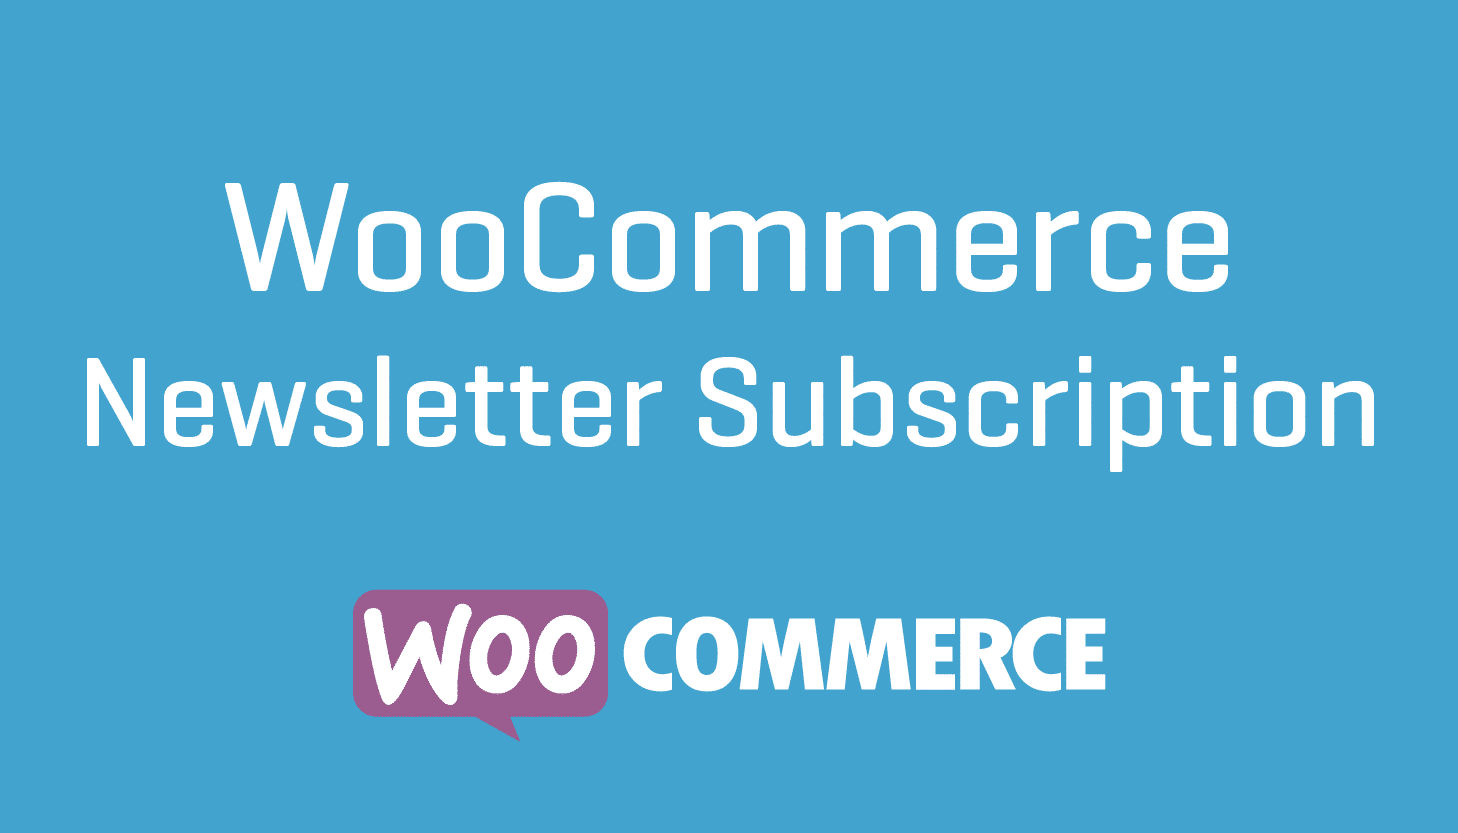 WooCommerce Newsletter Subscription.png